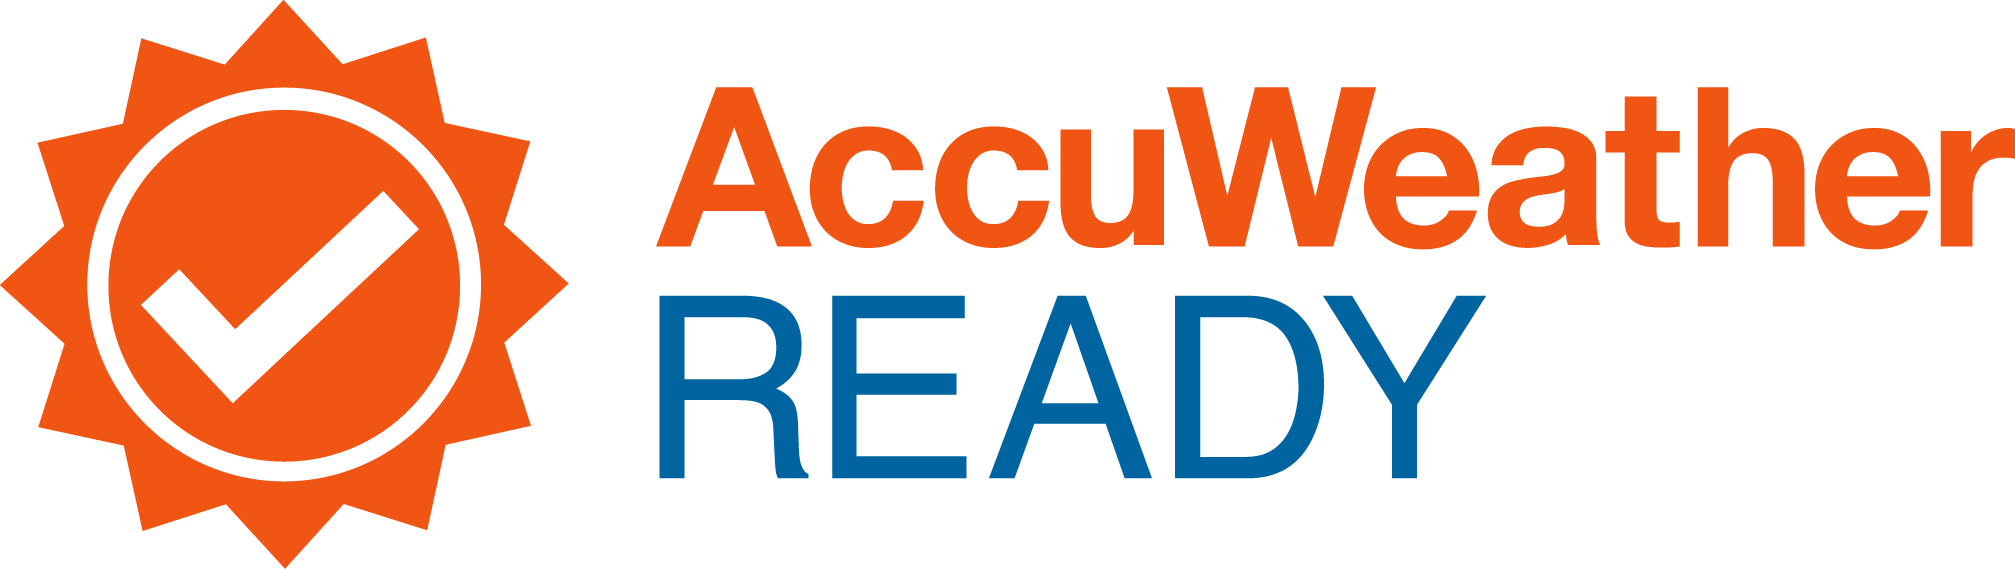 Accuweather.com Logo - How to drive safely when roads are covered with snow